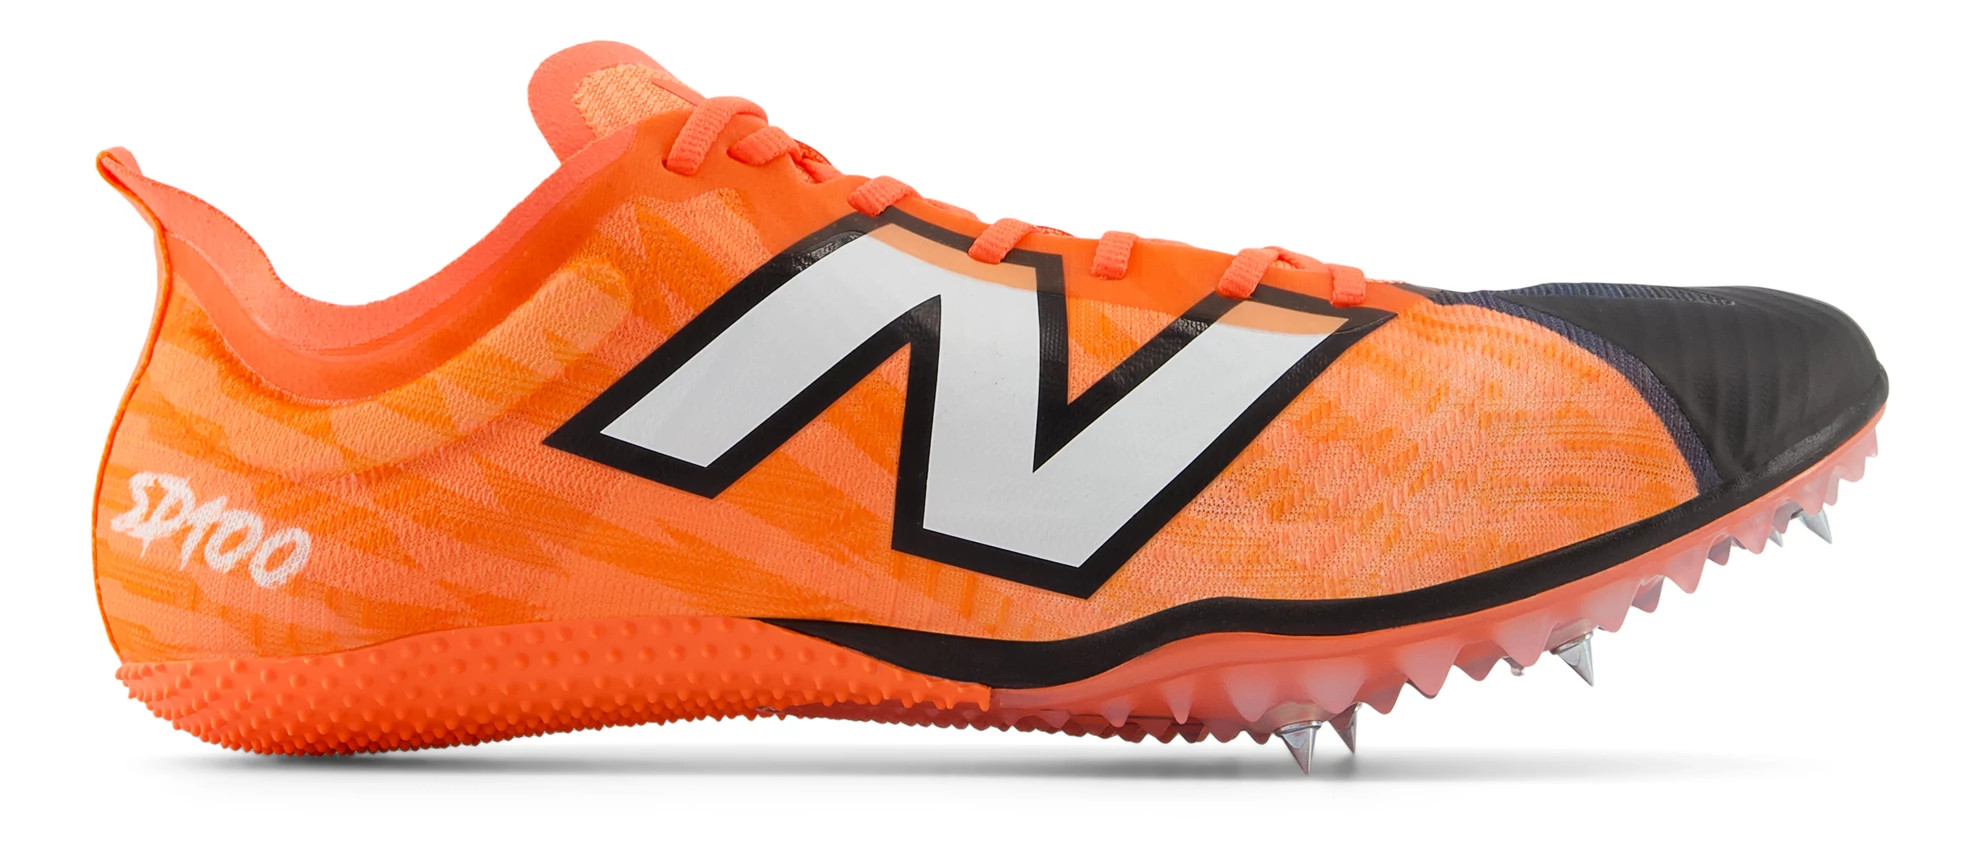 New Balance FuelCell SD100 v5 Track and Field Shoe